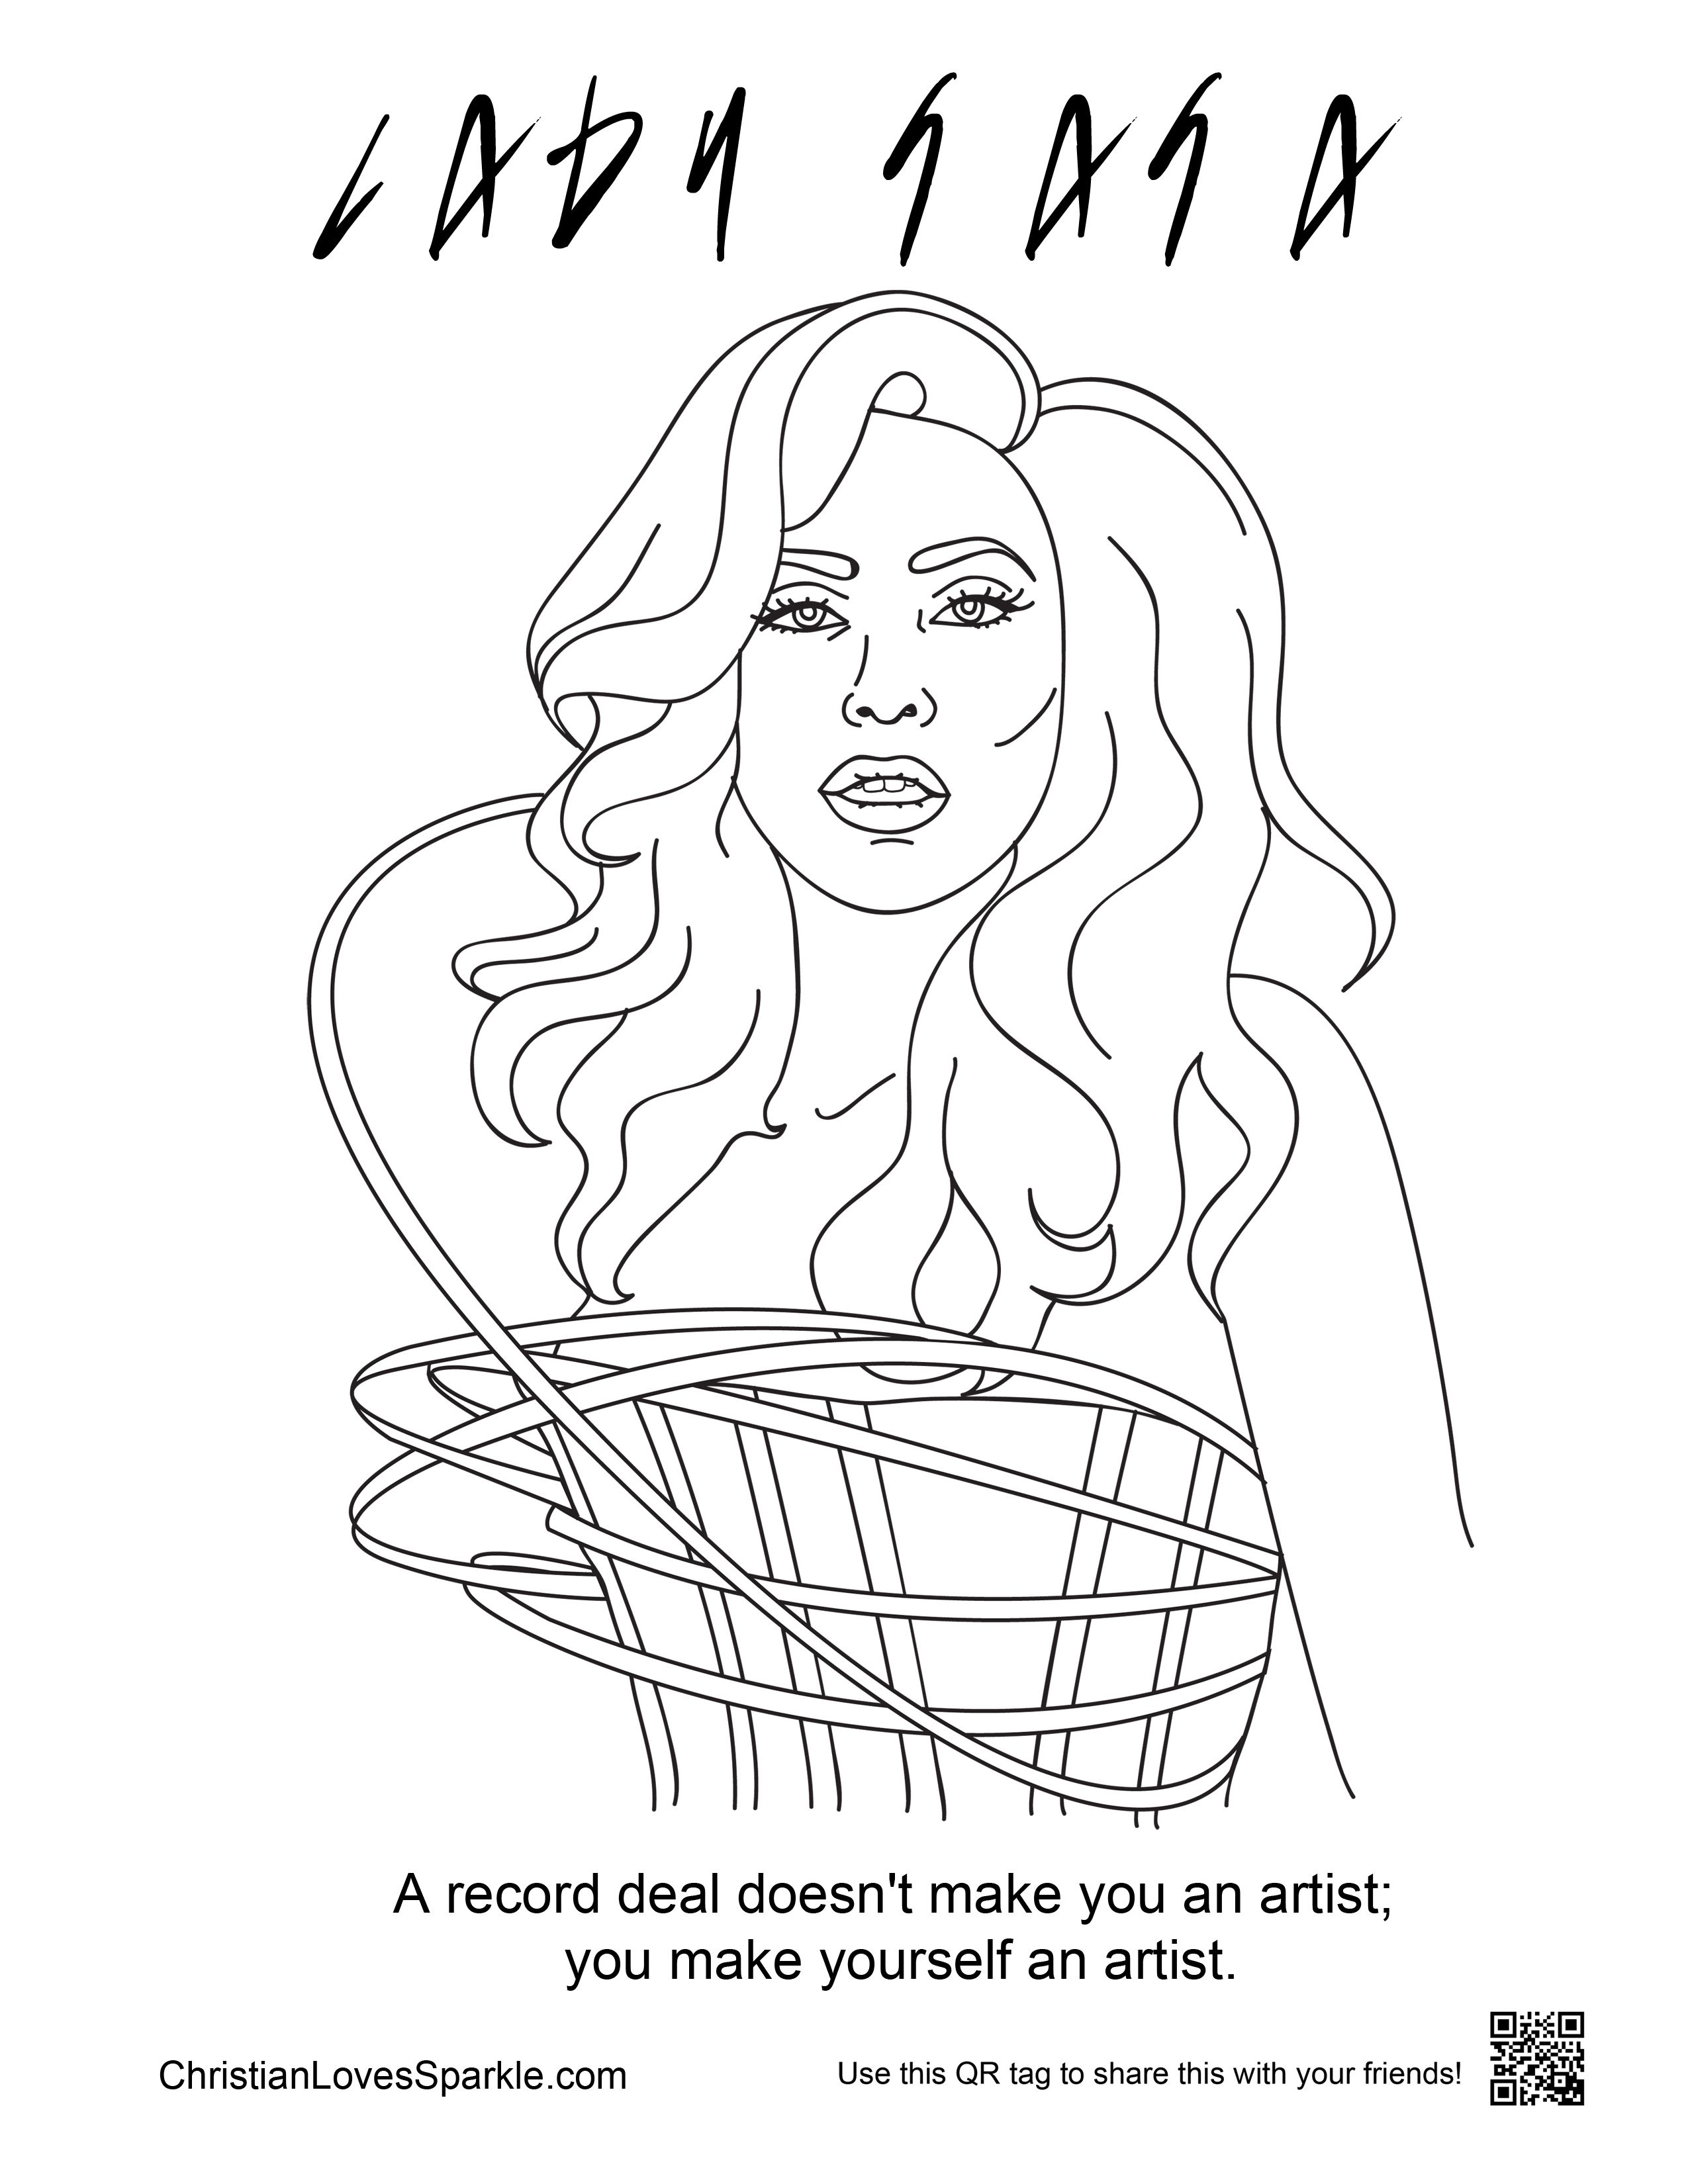 Lady Gaga Coloring Pages   Coloring Home